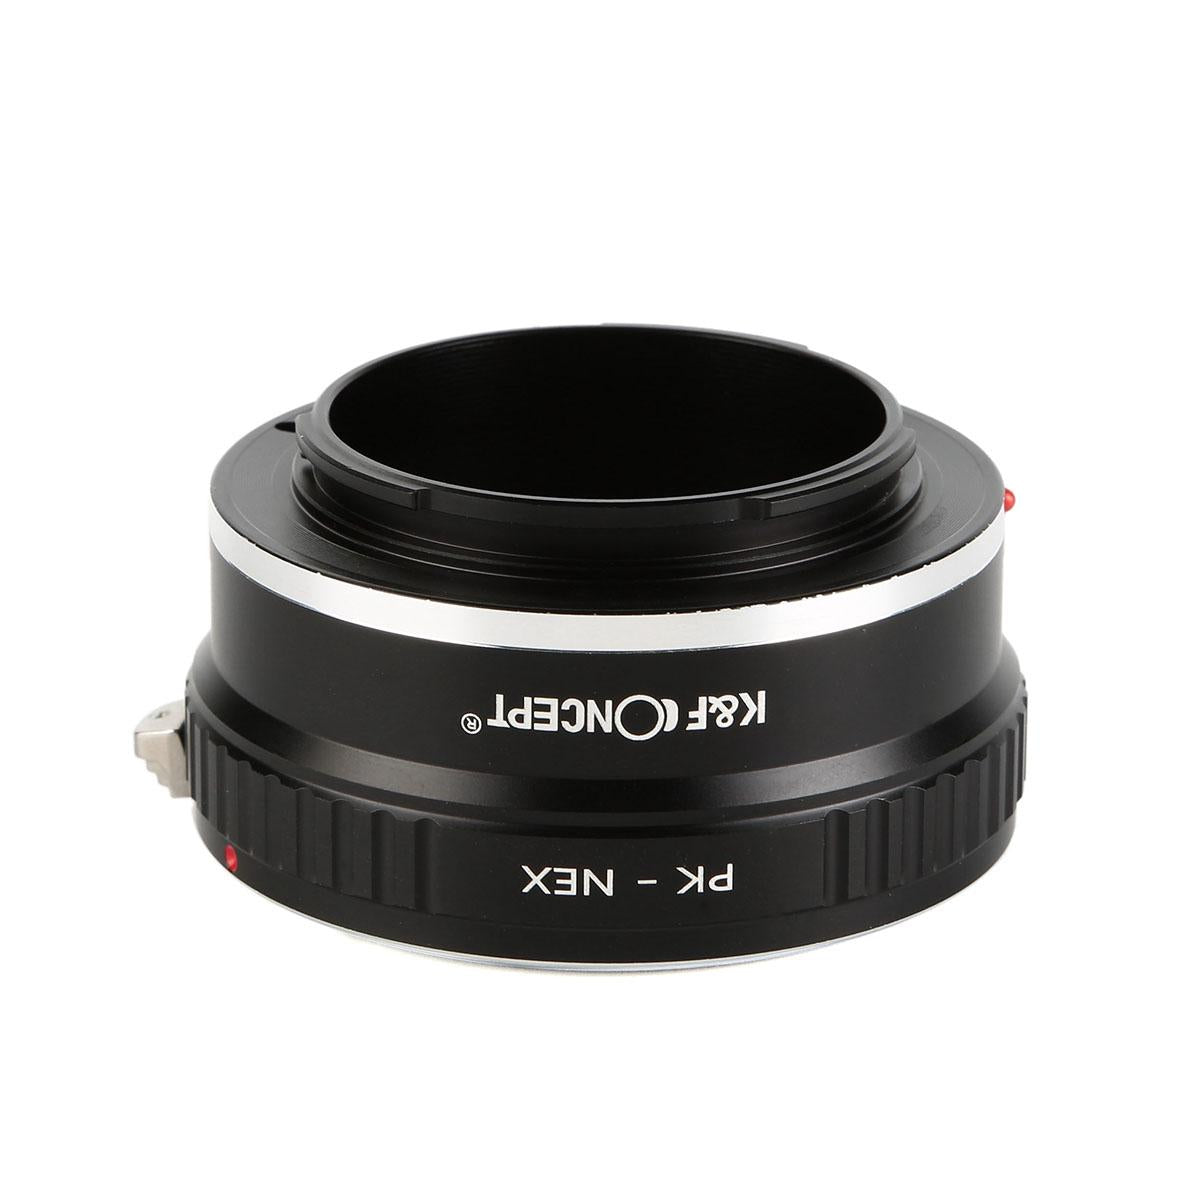 Pentax K Lenses to Sony E Lens Mount Adapter with Tripod Mount K&F Concept M17102 Lens Adapter